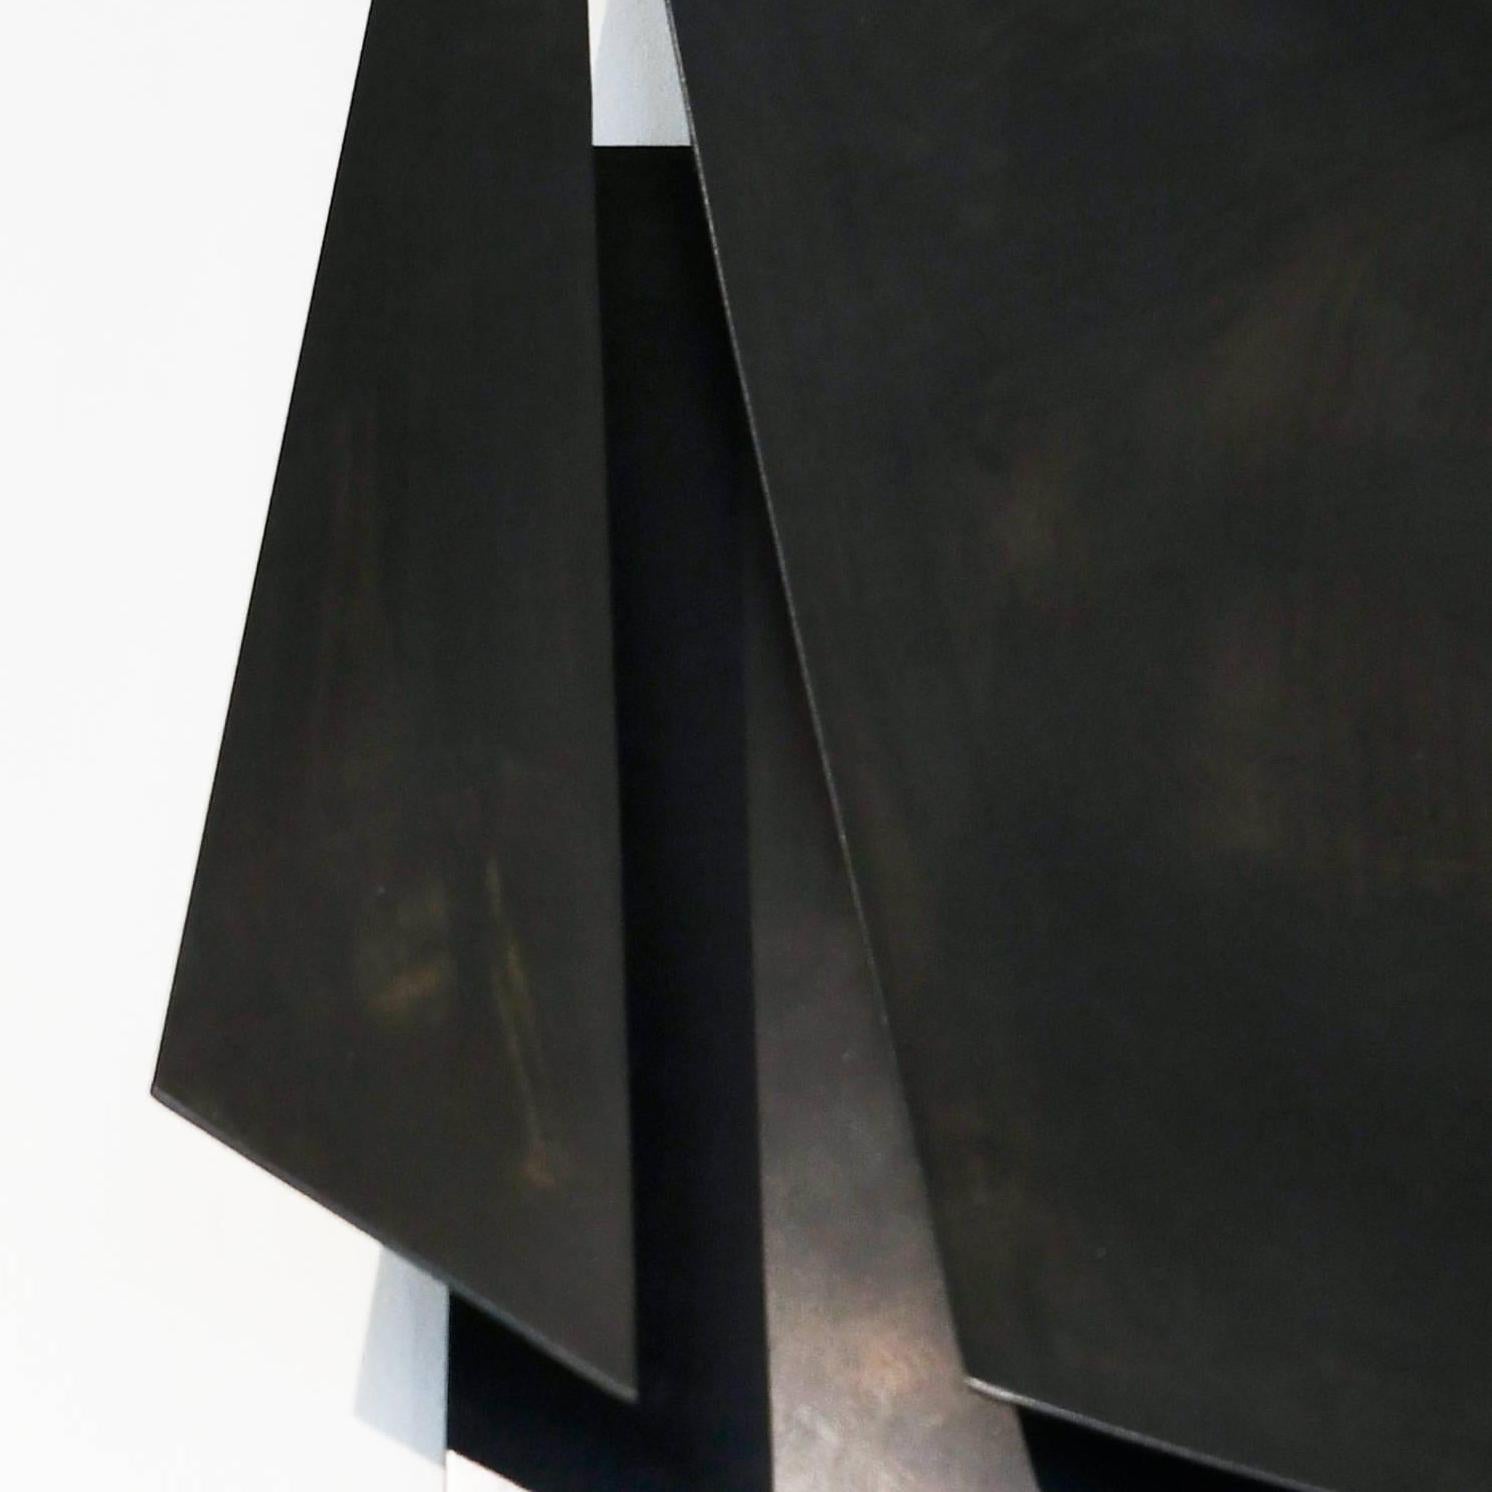 Conscience Shadow - Abstract Sculpture by Joe Wheaton